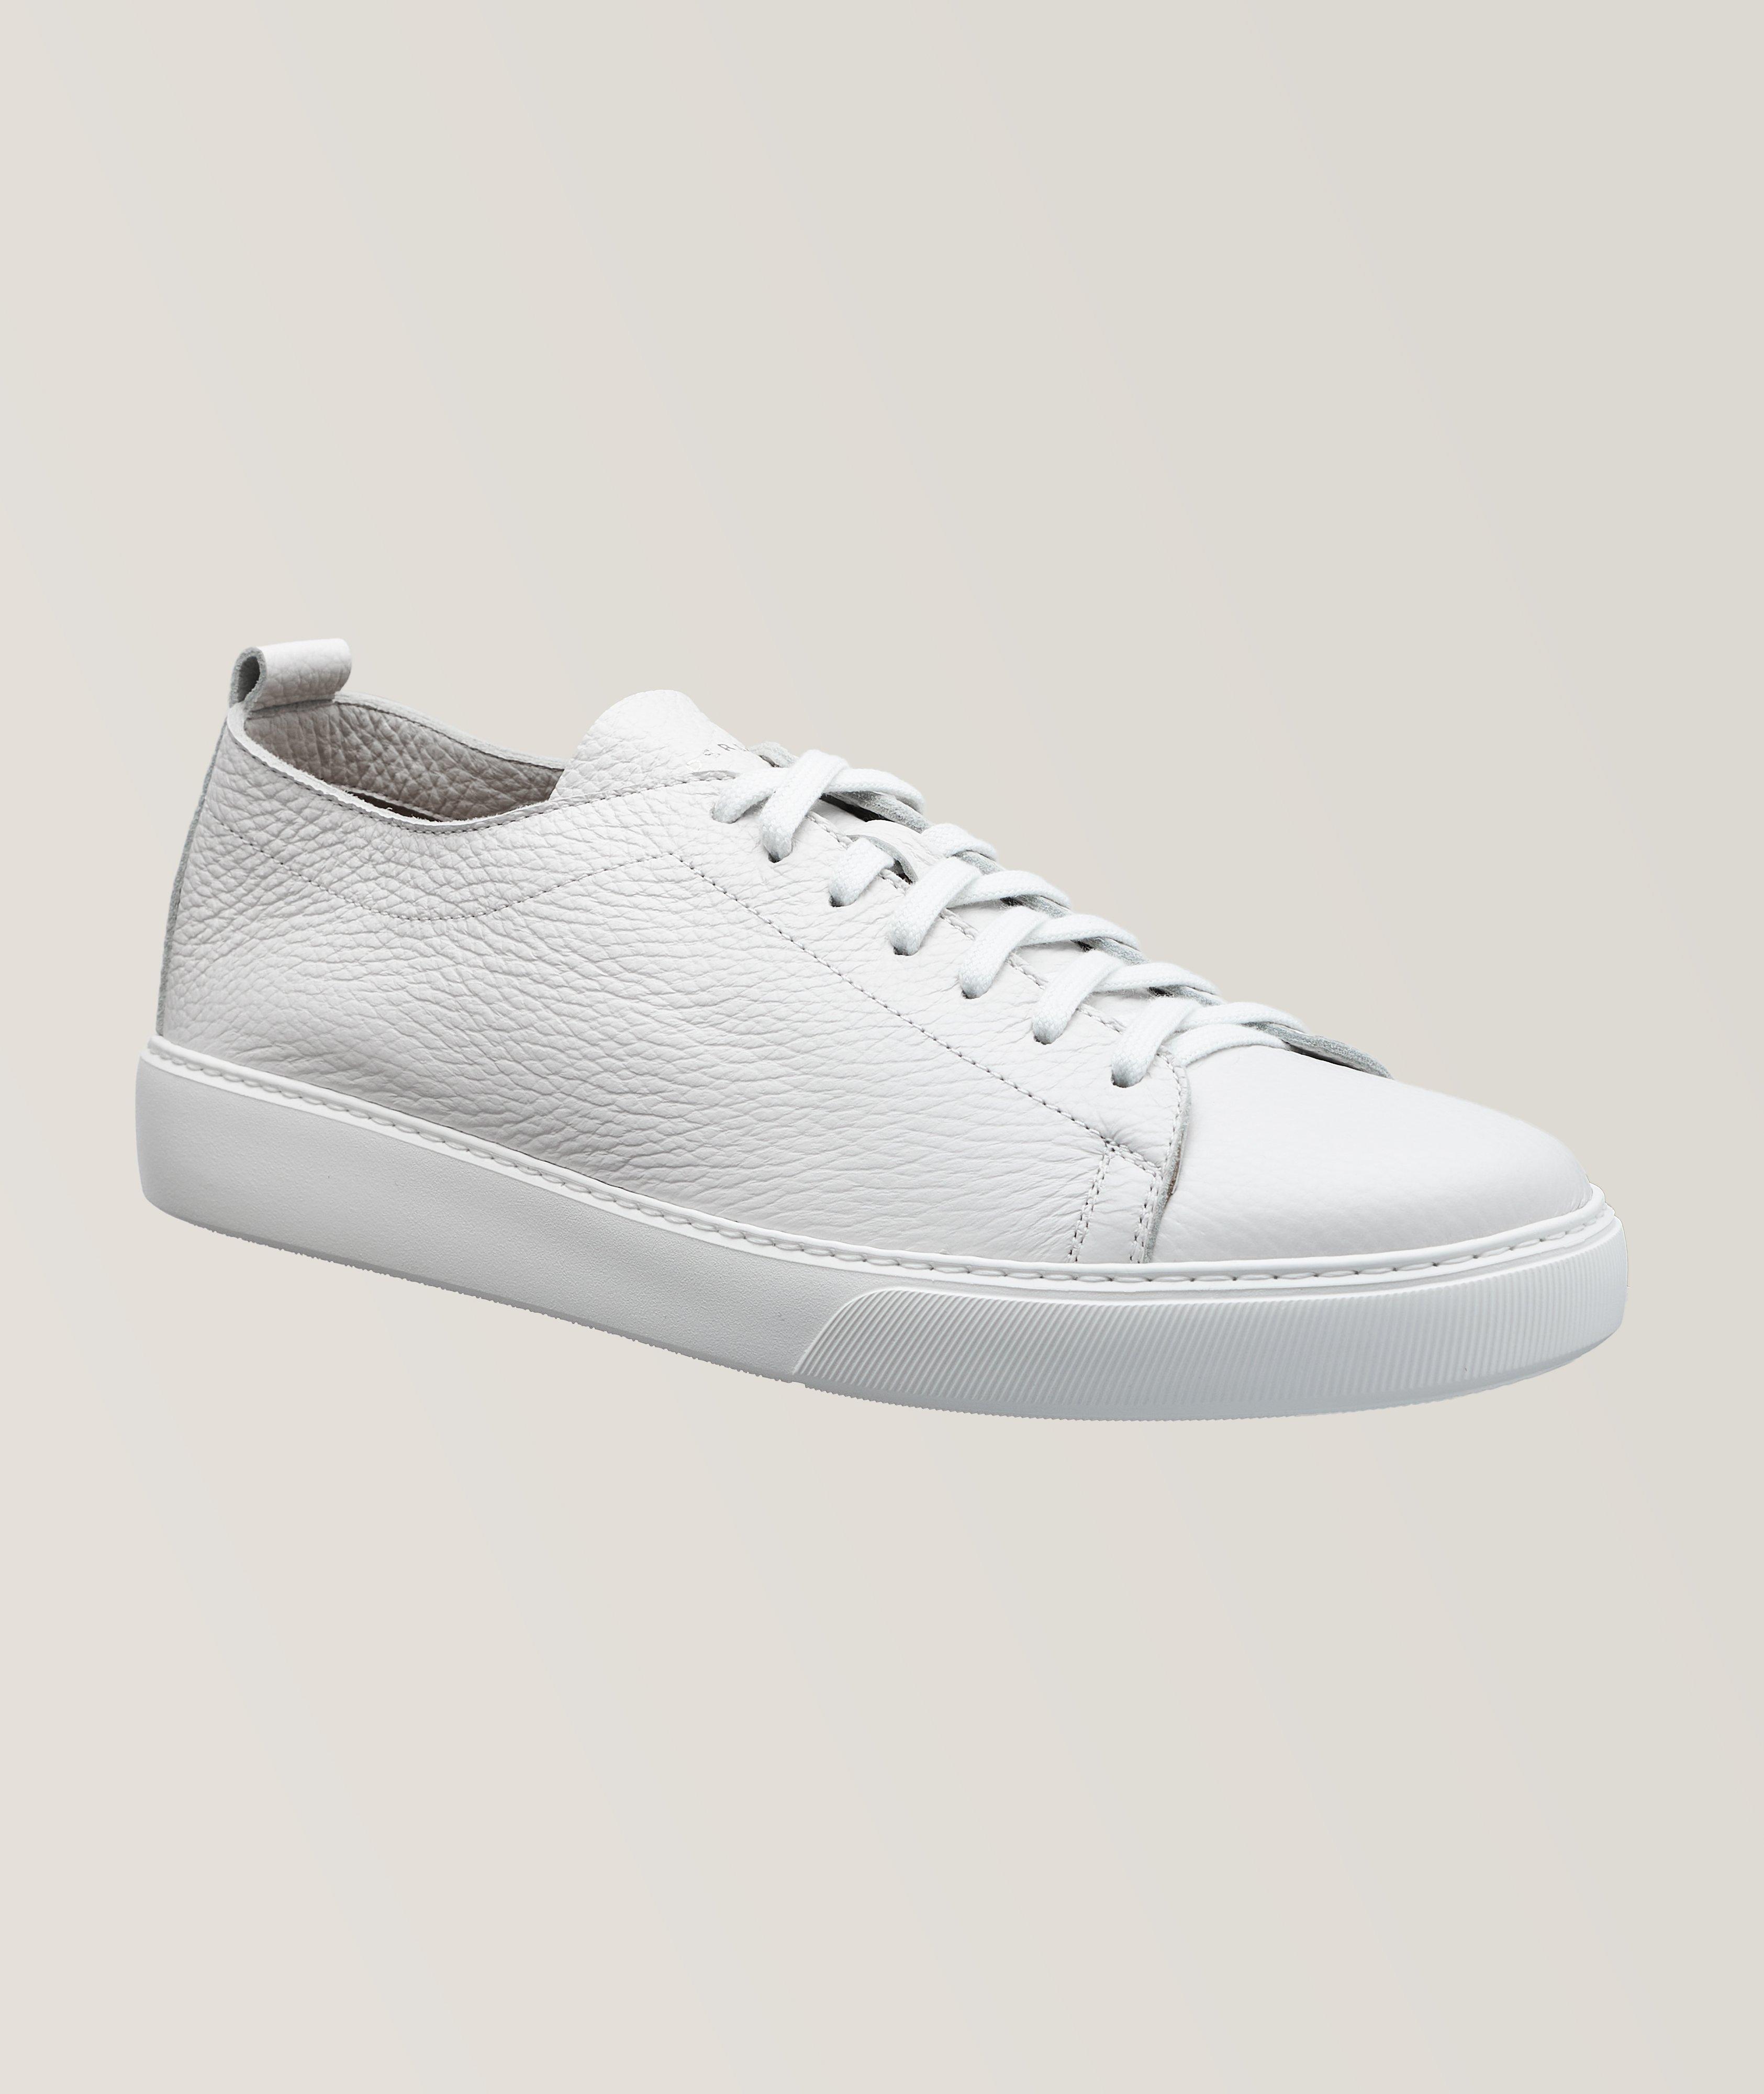 Grain Leather Byron Sneakers image 0